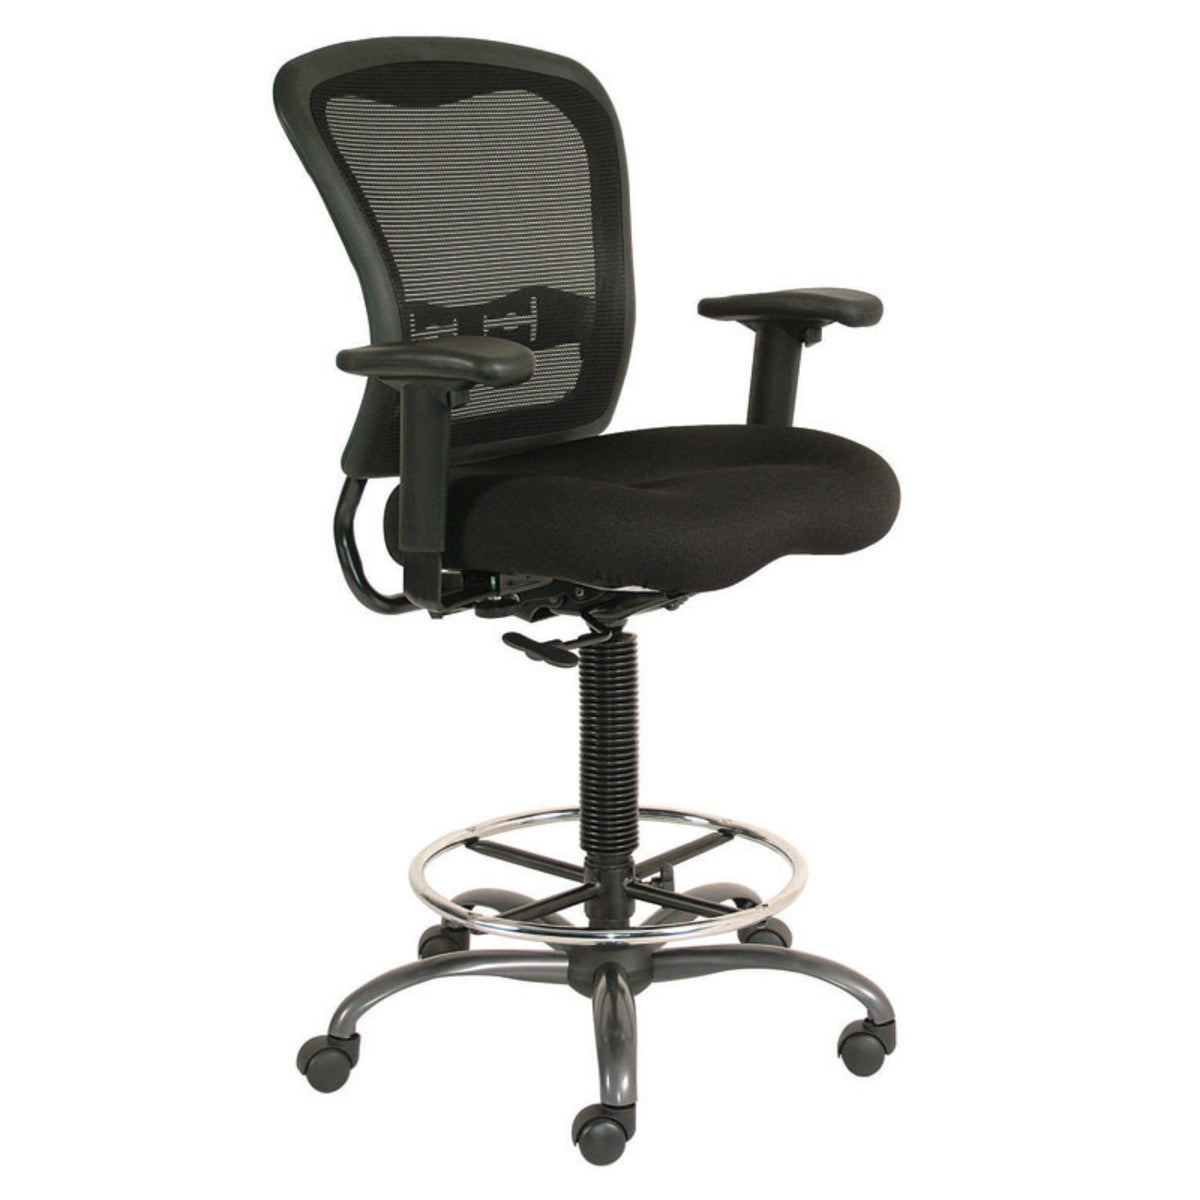 Duckys Office Furniture - Spice Drafting Stool - Duckys Office Furniture